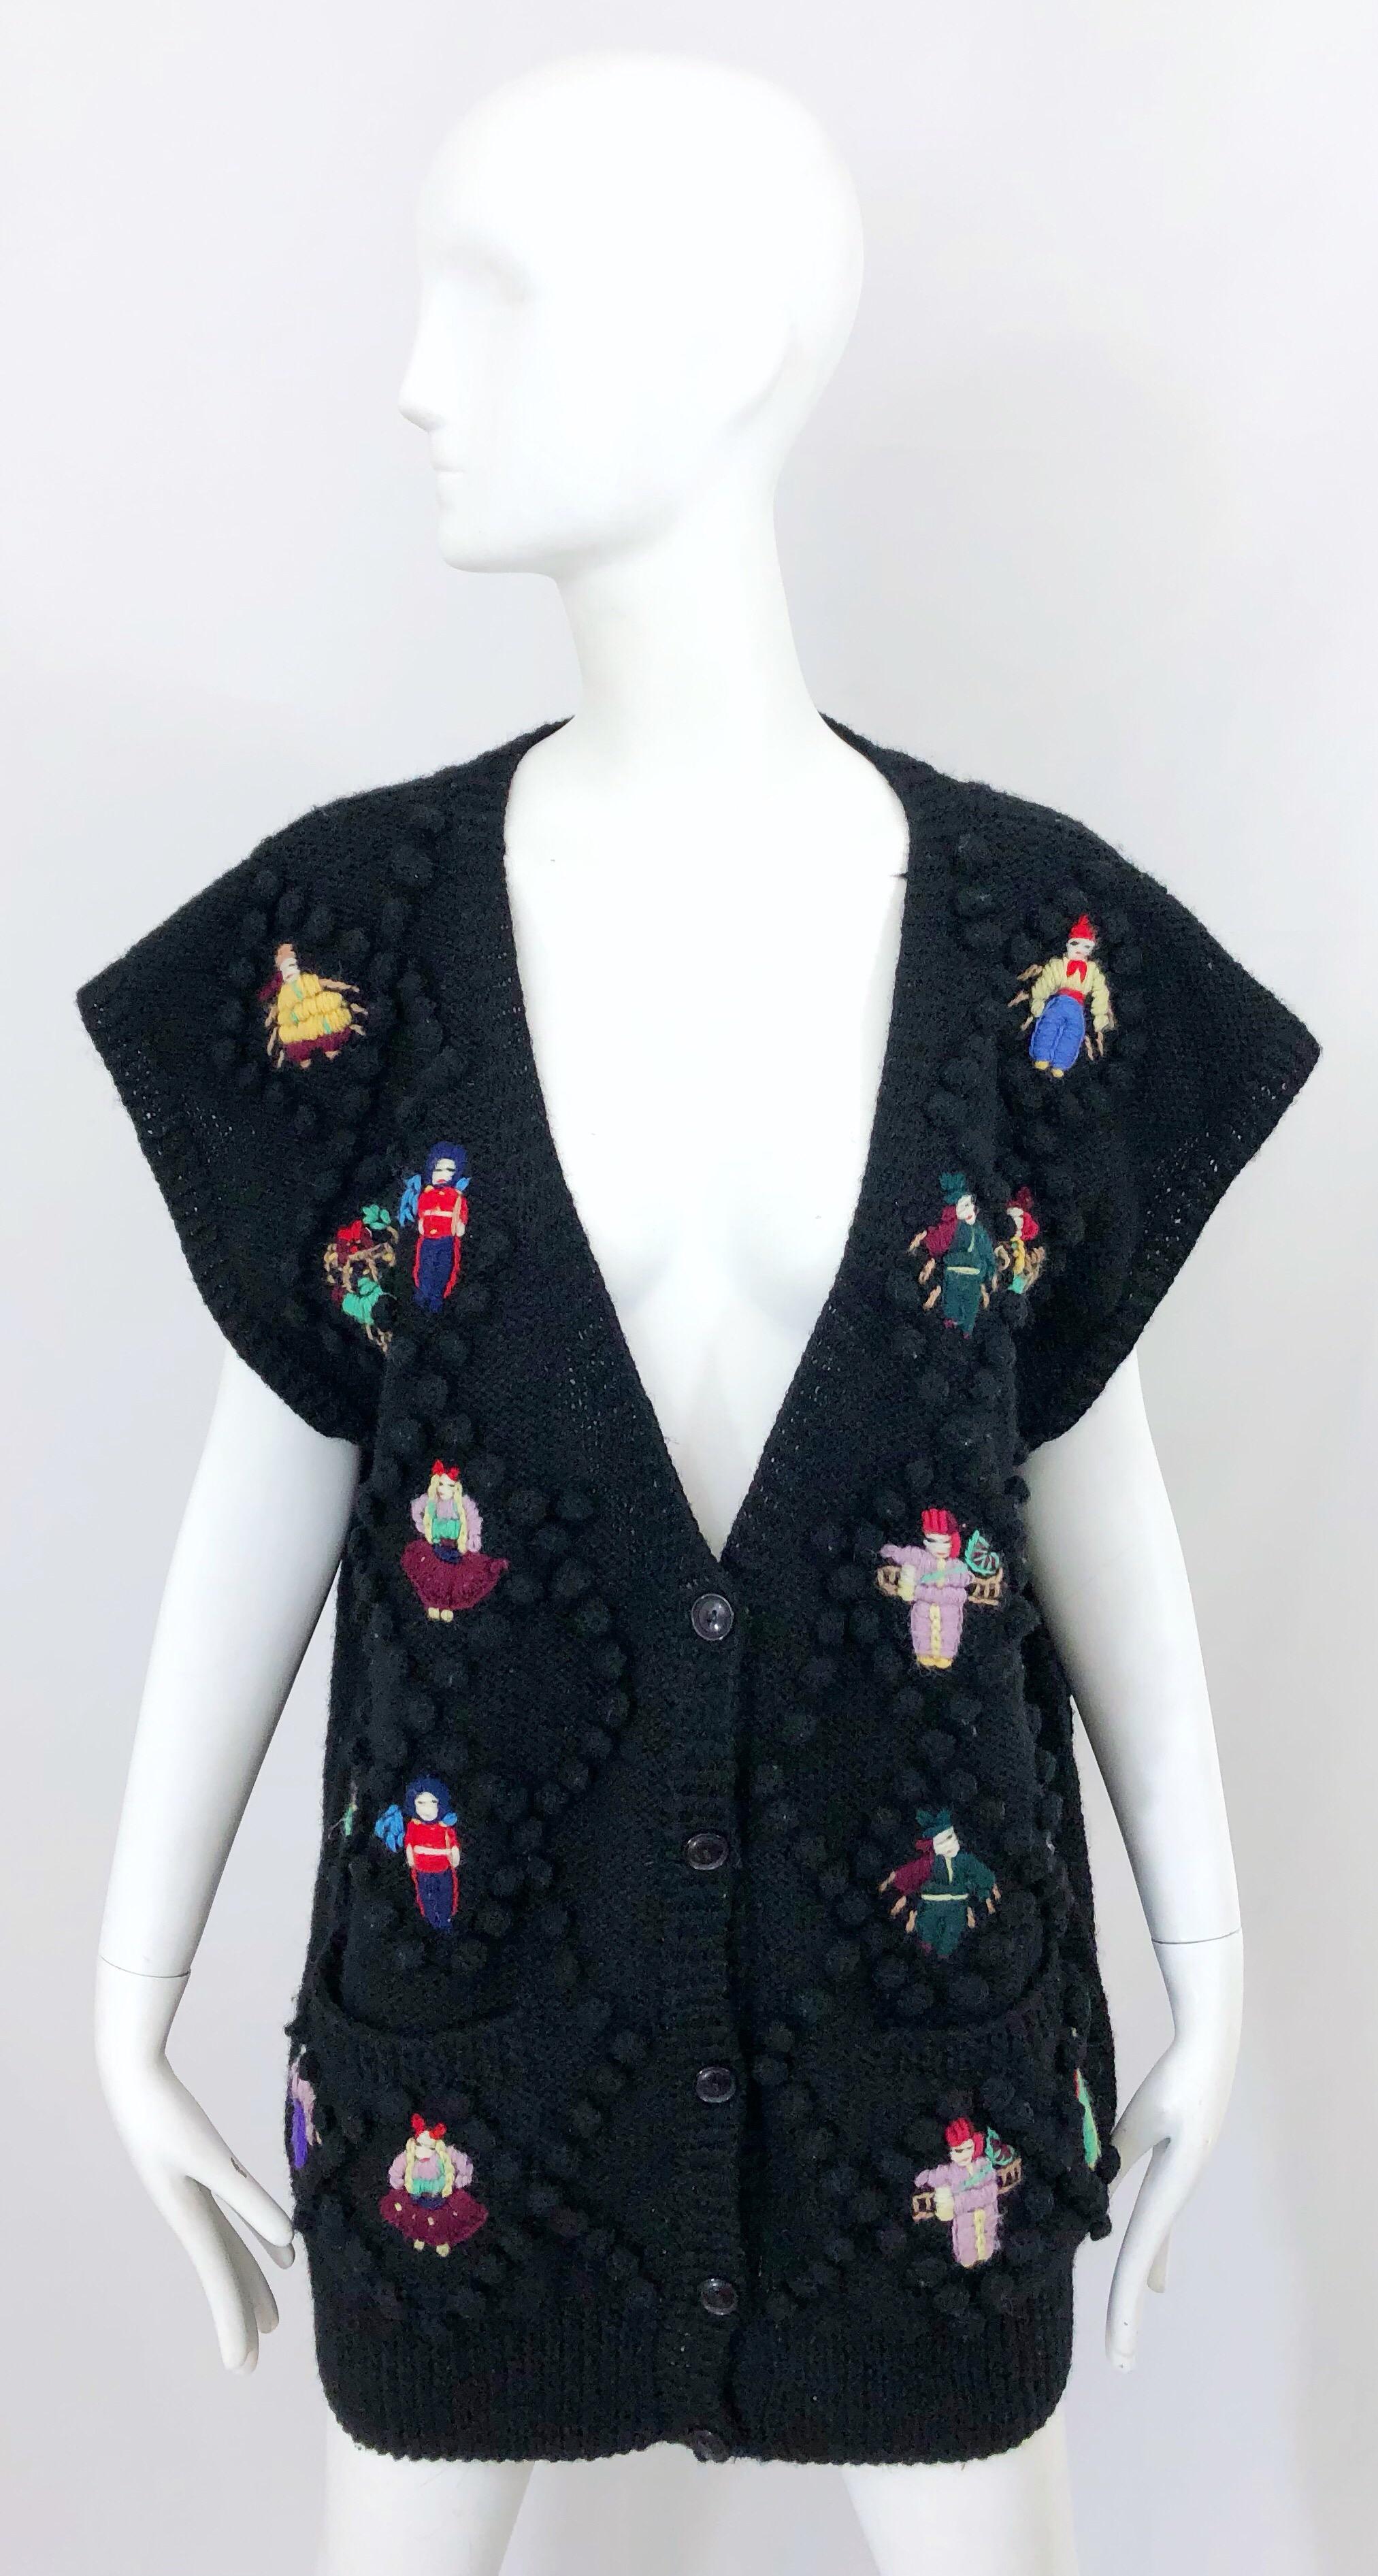 Rare 80s NORMA KAMALI black wool Avant Garde doll appliqués sleeveless slouchy sweater vest! Features ten intricately sewn doll appliqués one each side of the front. Black pom poms symmetrically throughout. Five buttons up the front. Chic dolman